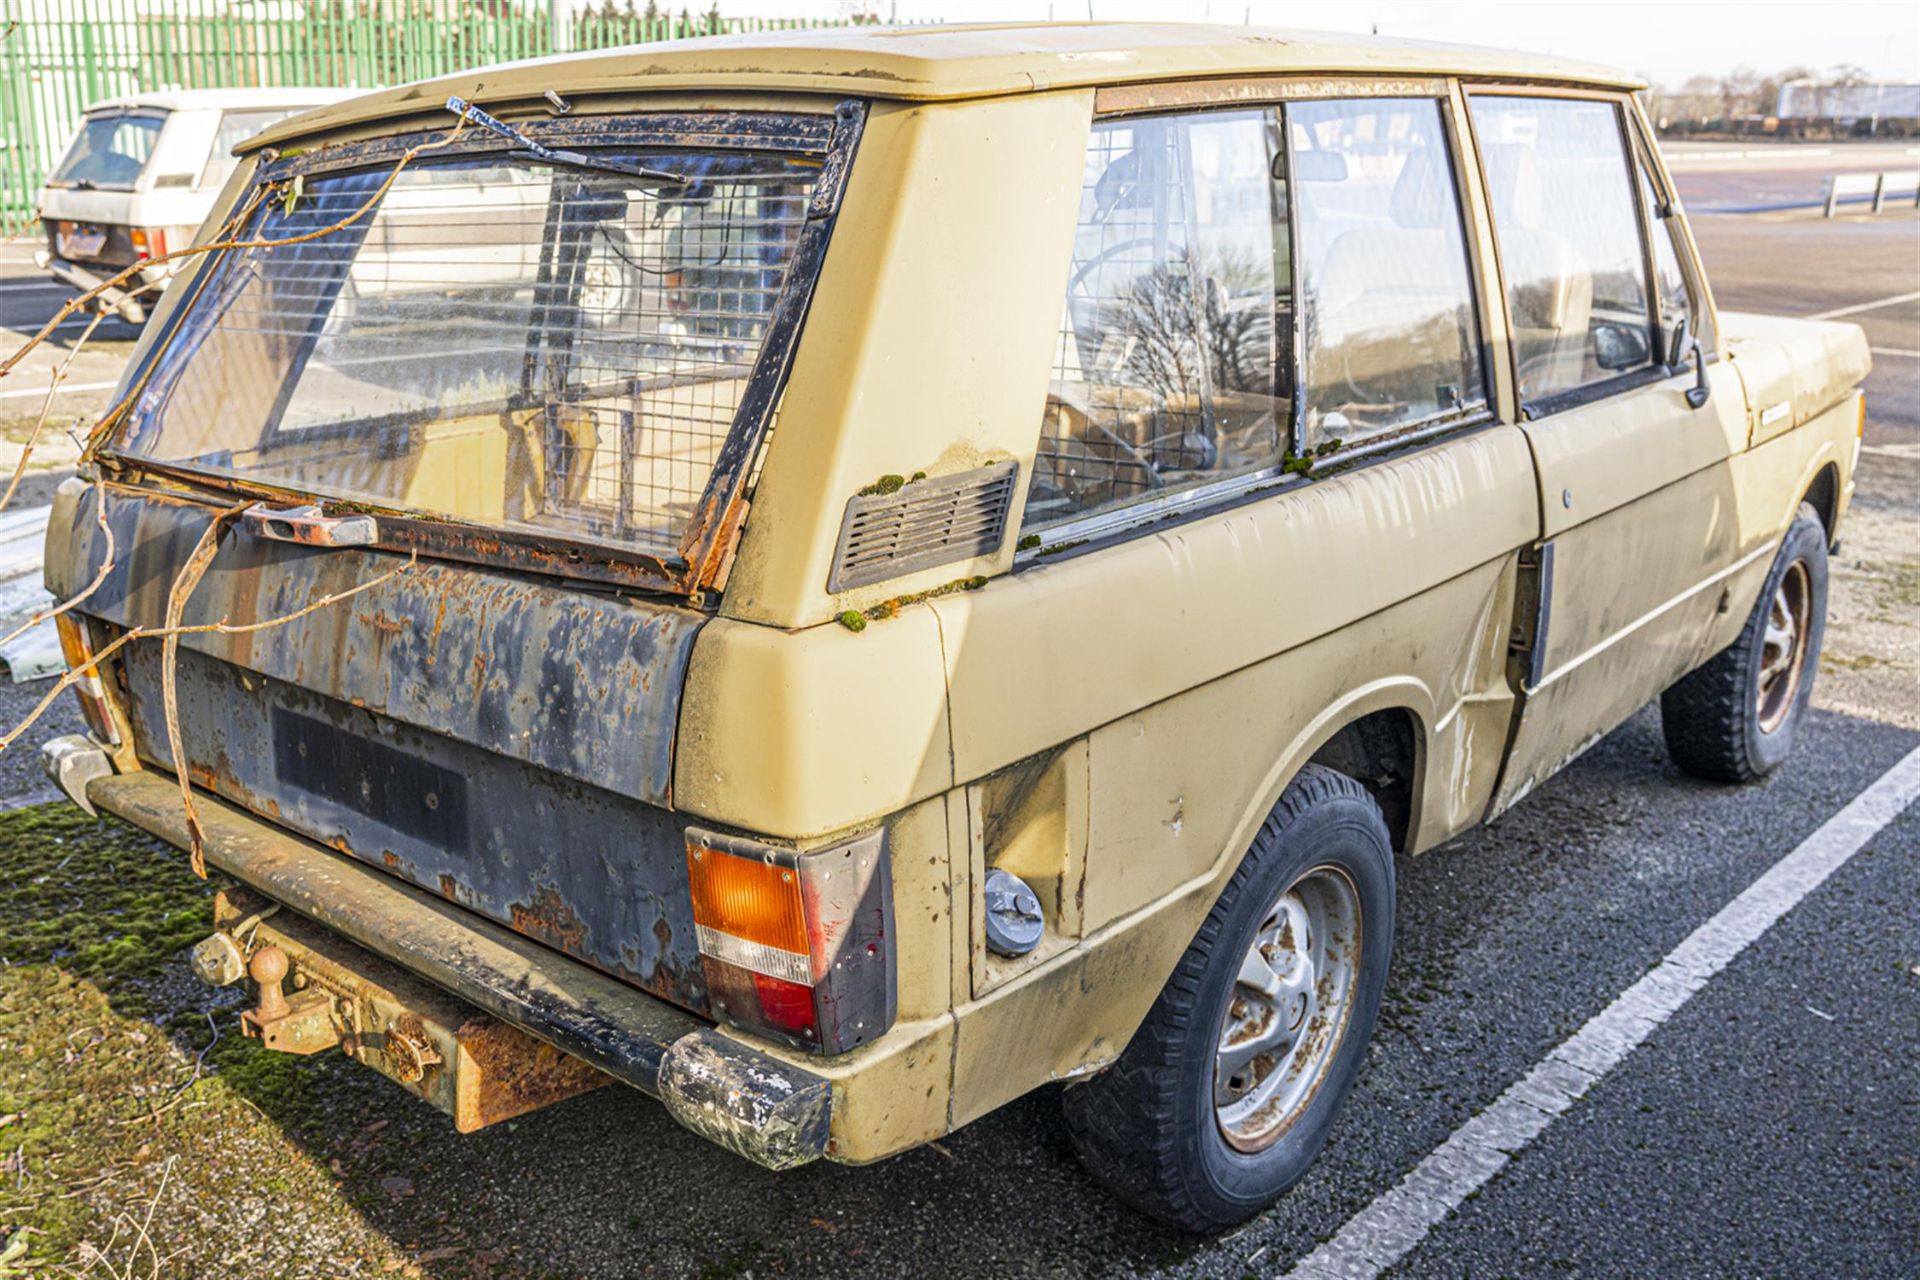 1972 Range Rover Classic 'Suffix A' - Image 3 of 5